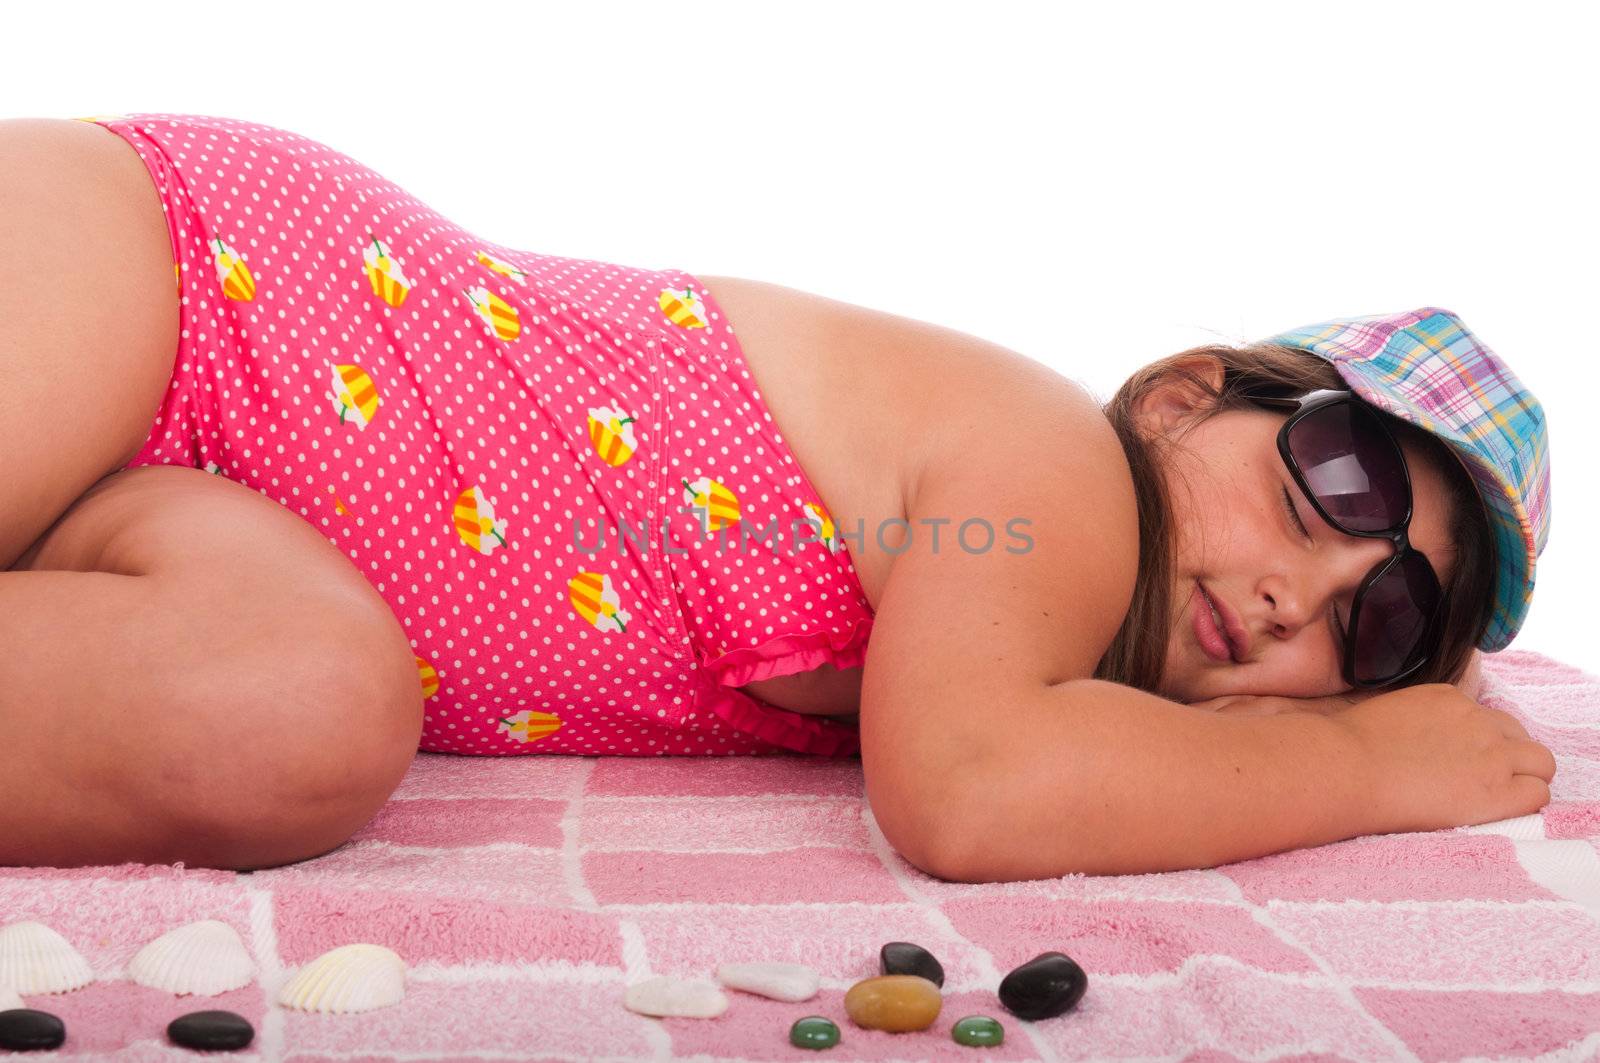 beautiful brunette teenage girl in swimsuit sleeping at the beach (studio setting with towel and pebbles, isolated on white background)